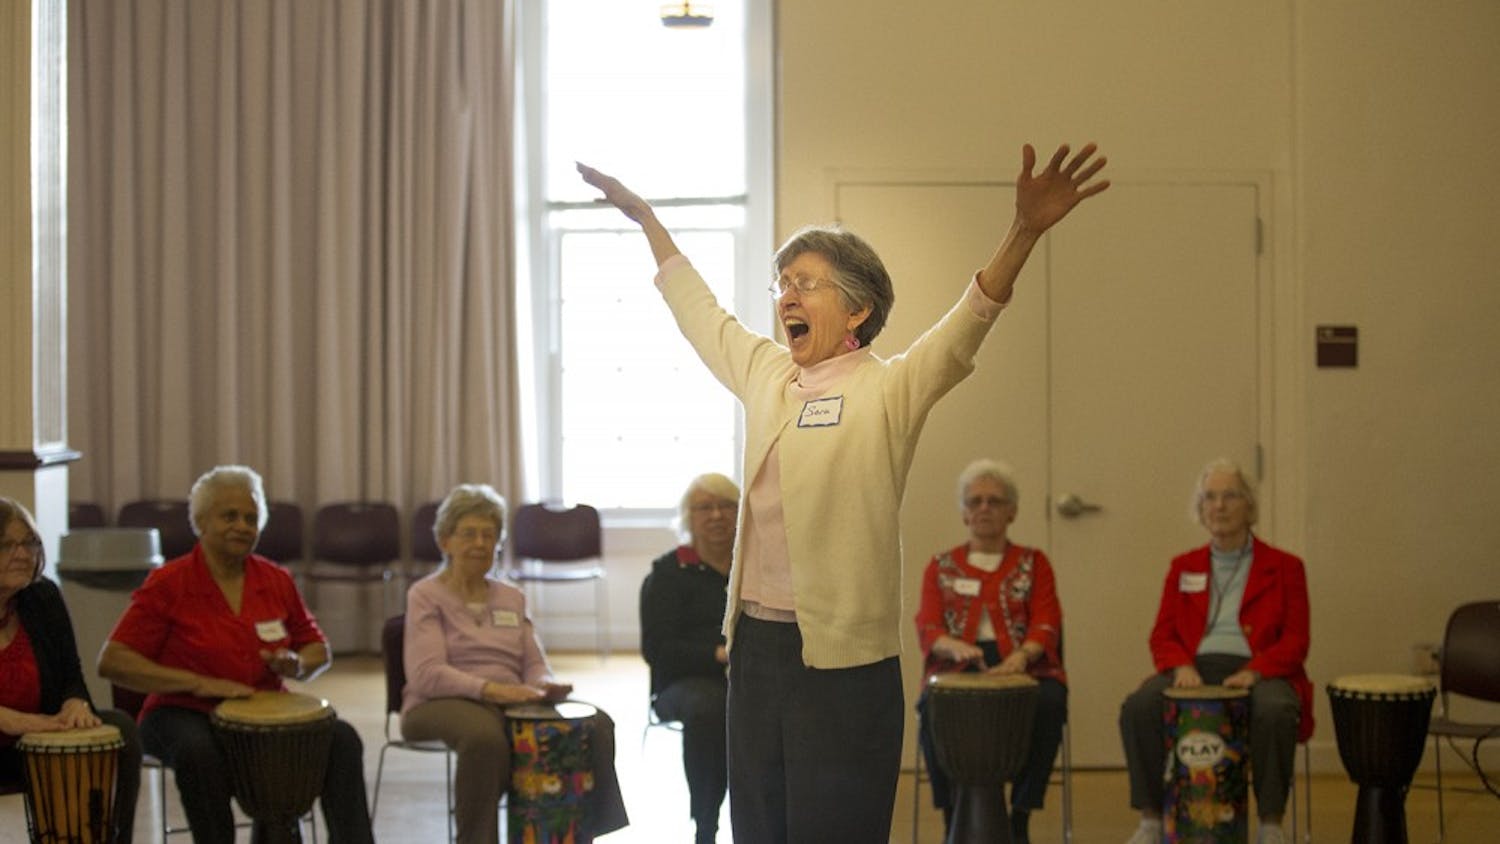 Sara Smith conducts the drum circle at the Valentines Day Party for Older Adults in Carrboro Friday afternoon.